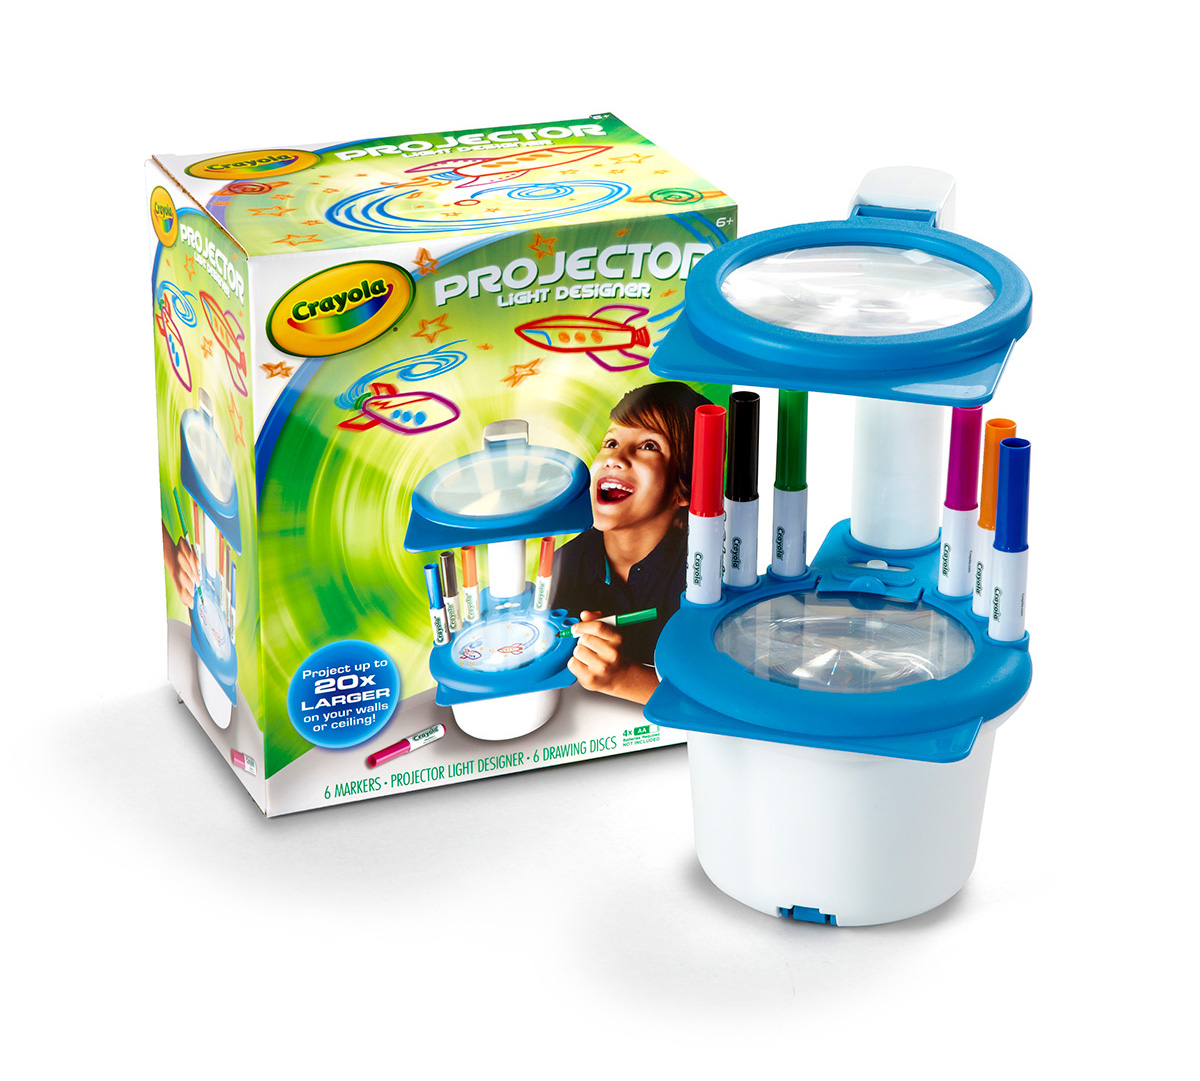 crayola trace and draw projector light bulb craftybootschalleges